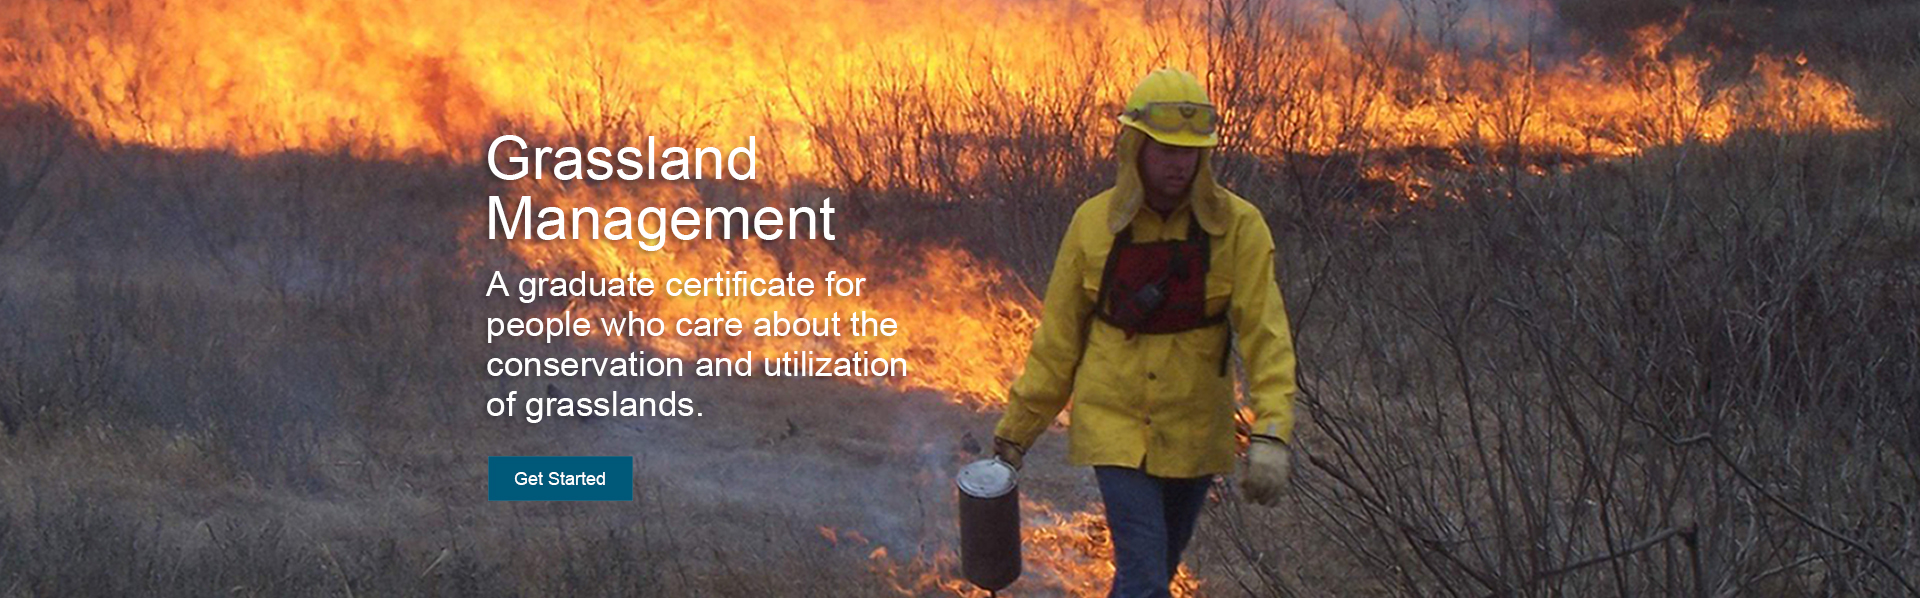 A man wearing protective gear walks away from a blazing fire in a field. The online grassland management graduate certificate is focused on conservation, utilization, and sustainability of managed grassland systems.